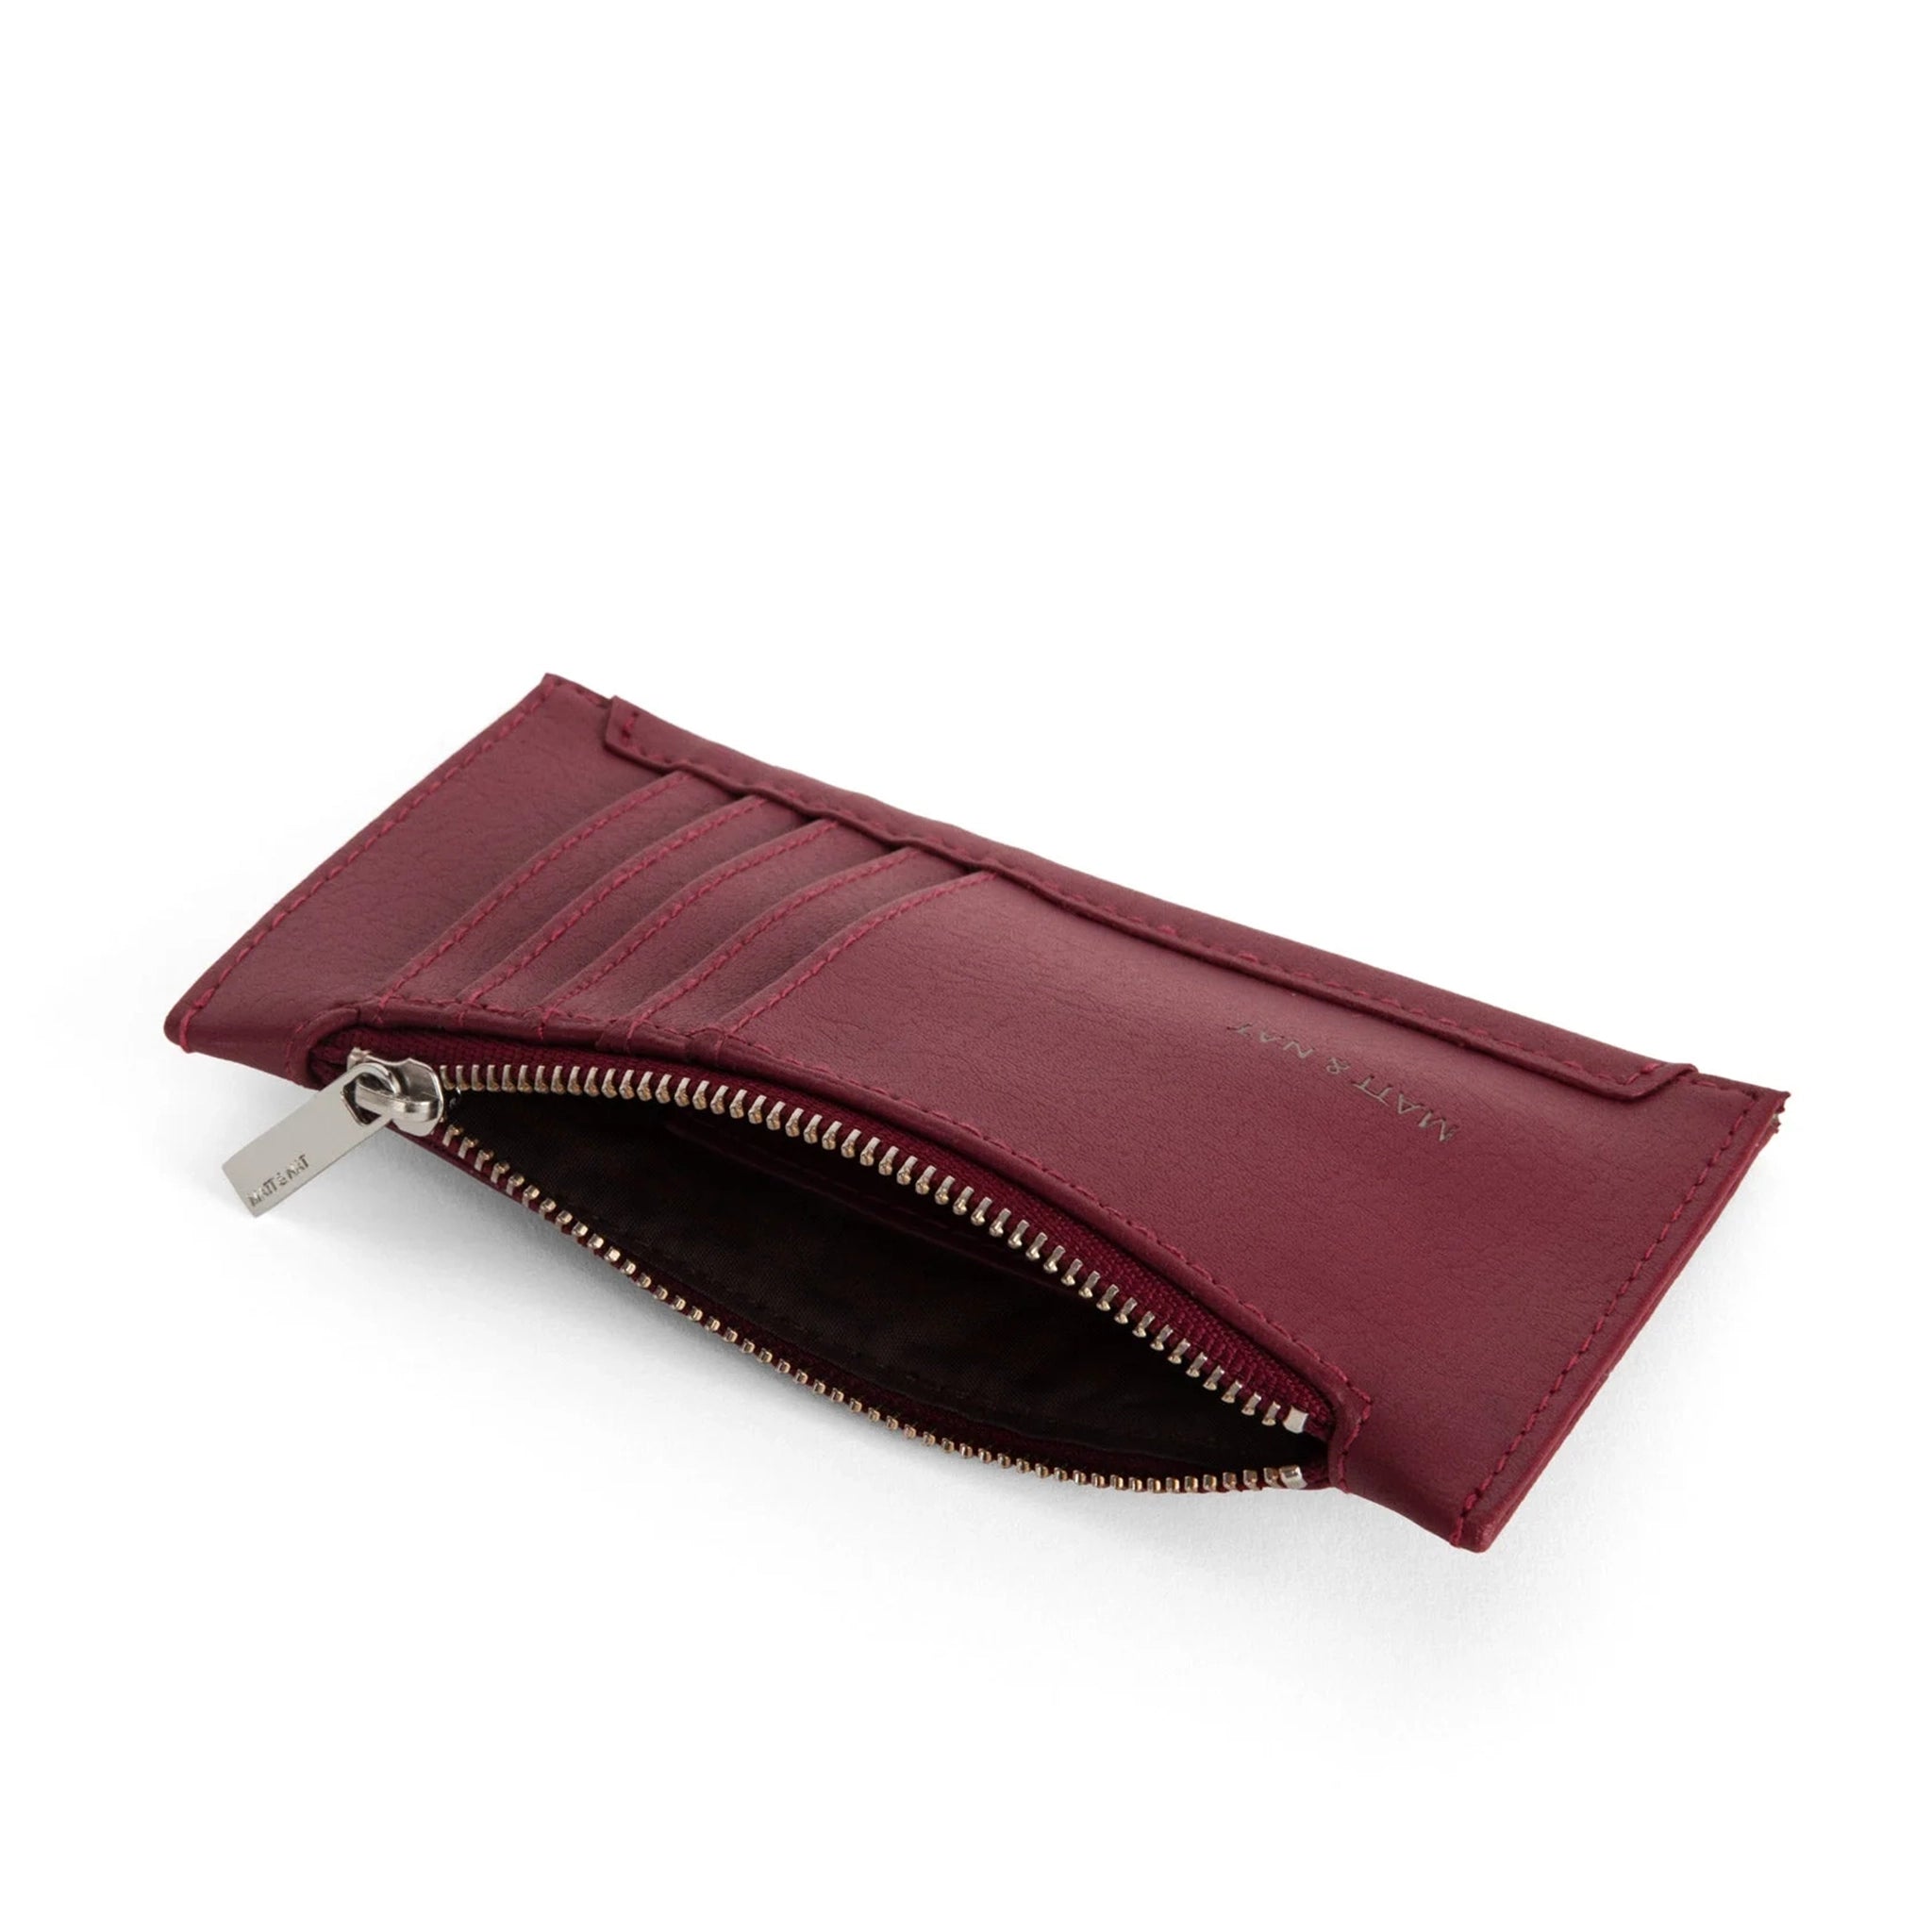 On a white background is a dark cherry red with card slots on the outside and a zipper pocket.